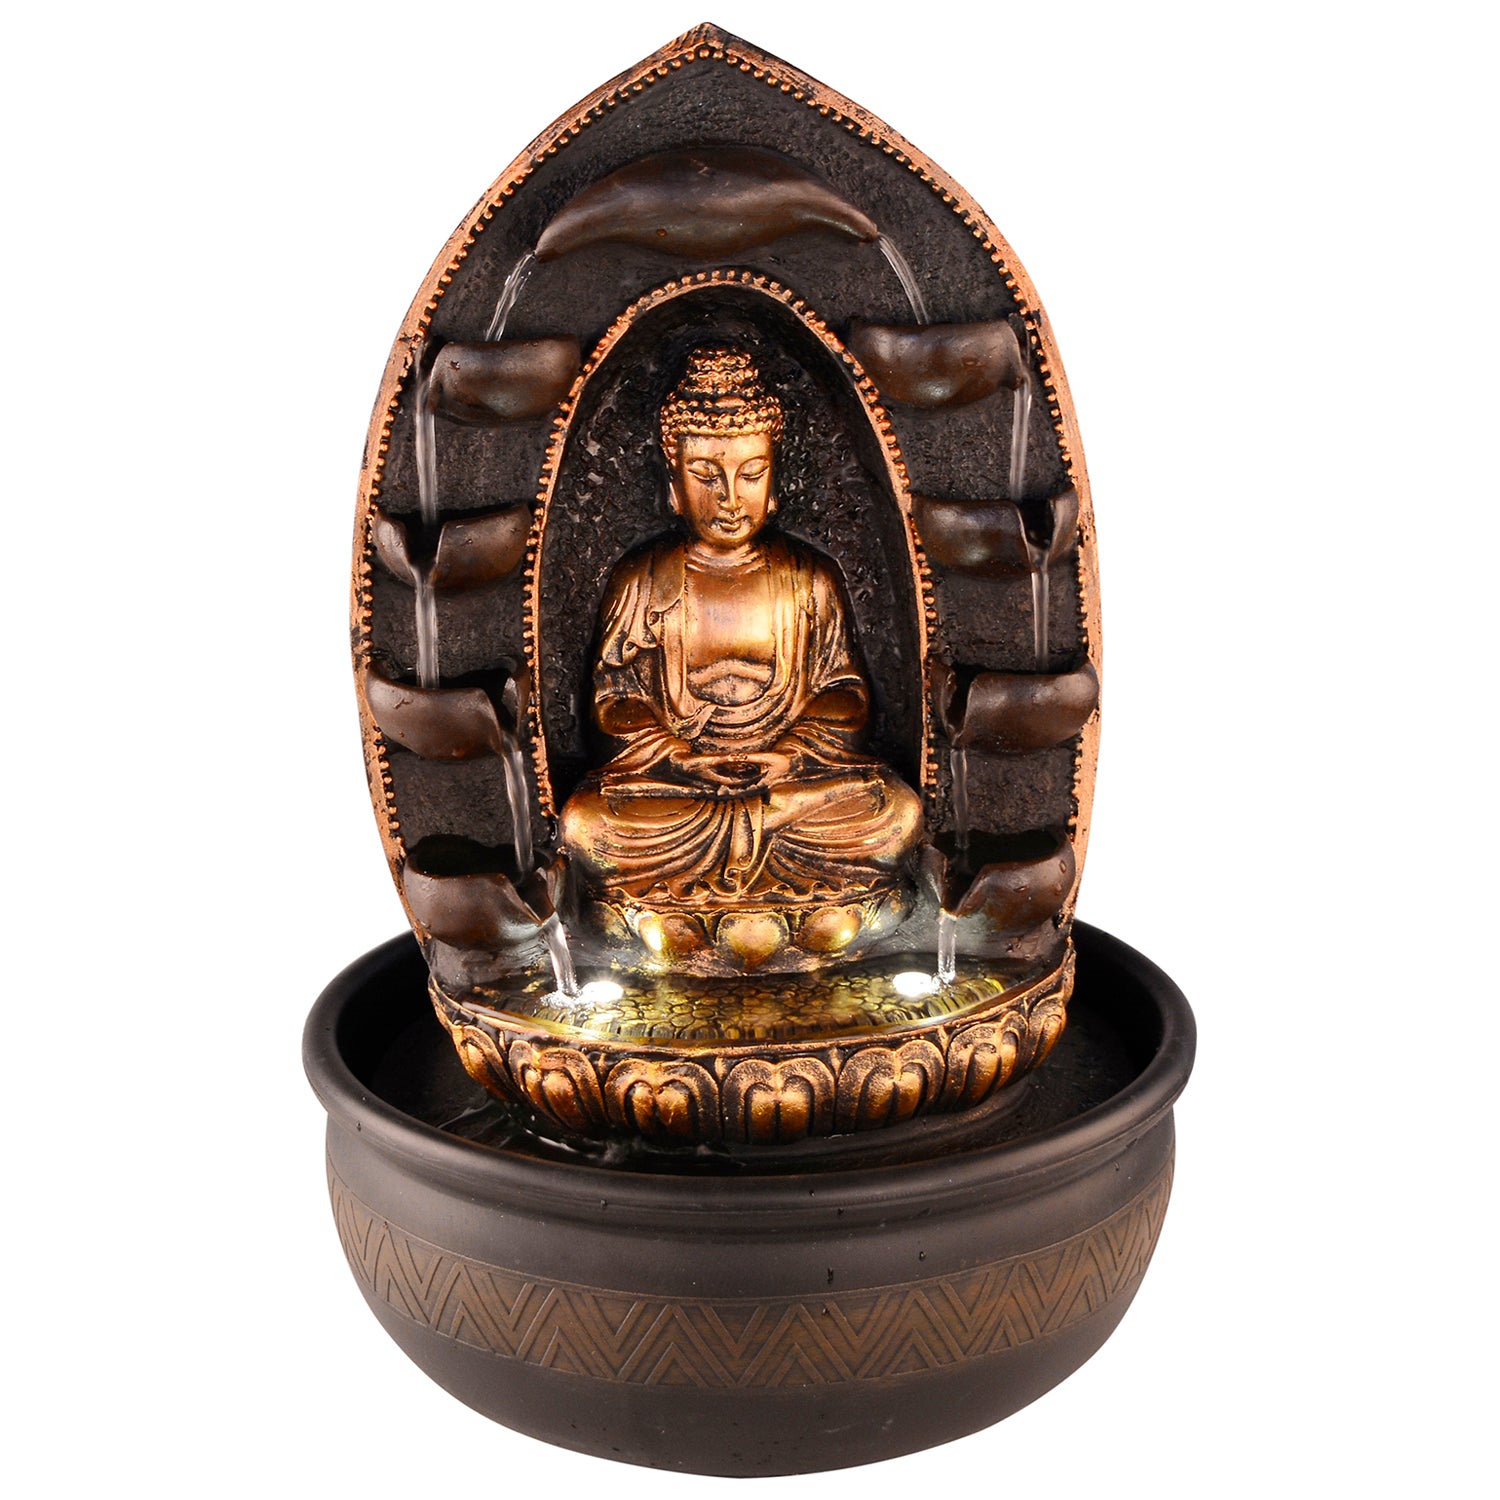 Polystone Brown and Golden Lotus Meditating Buddha Idol Water Fountain With Crystal Ball for Home/Office Decor